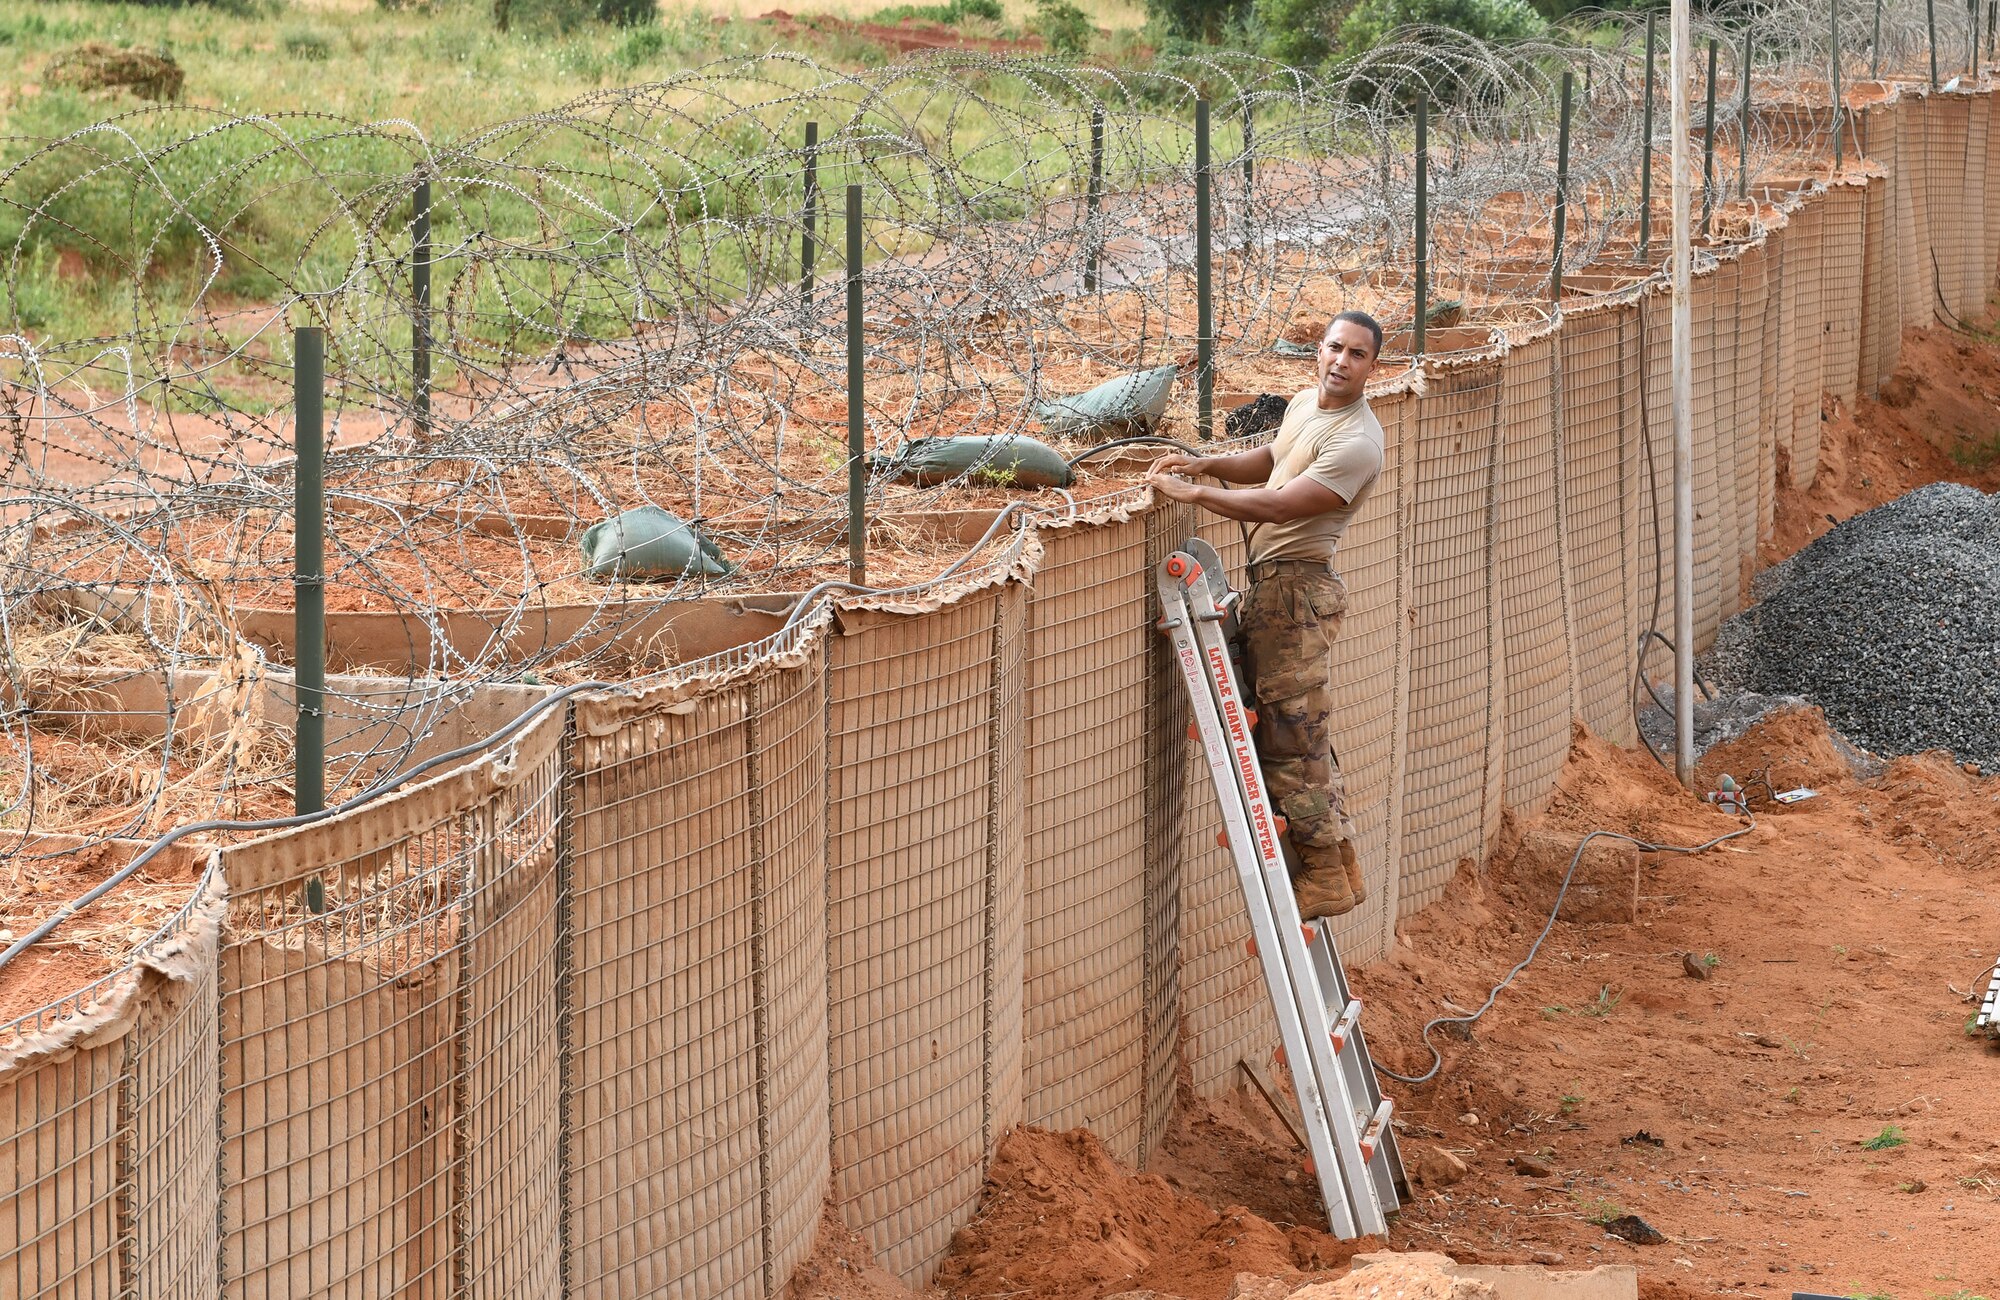 U.S. Air Force Tech. Sgt. Guillermo Cajigas, 768th Expeditionary Air Base Squadron Power Production and Electrical Systems section lead, secures a new cable for perimeter lighting at Nigerien Air Base 101, Niamey, Niger, Oct. 10, 2019. The cable was rerouted to make way for the foundation of the base’s new gym facilities. (U.S. Air Force photo by Staff Sgt. Alex Fox Echols III)